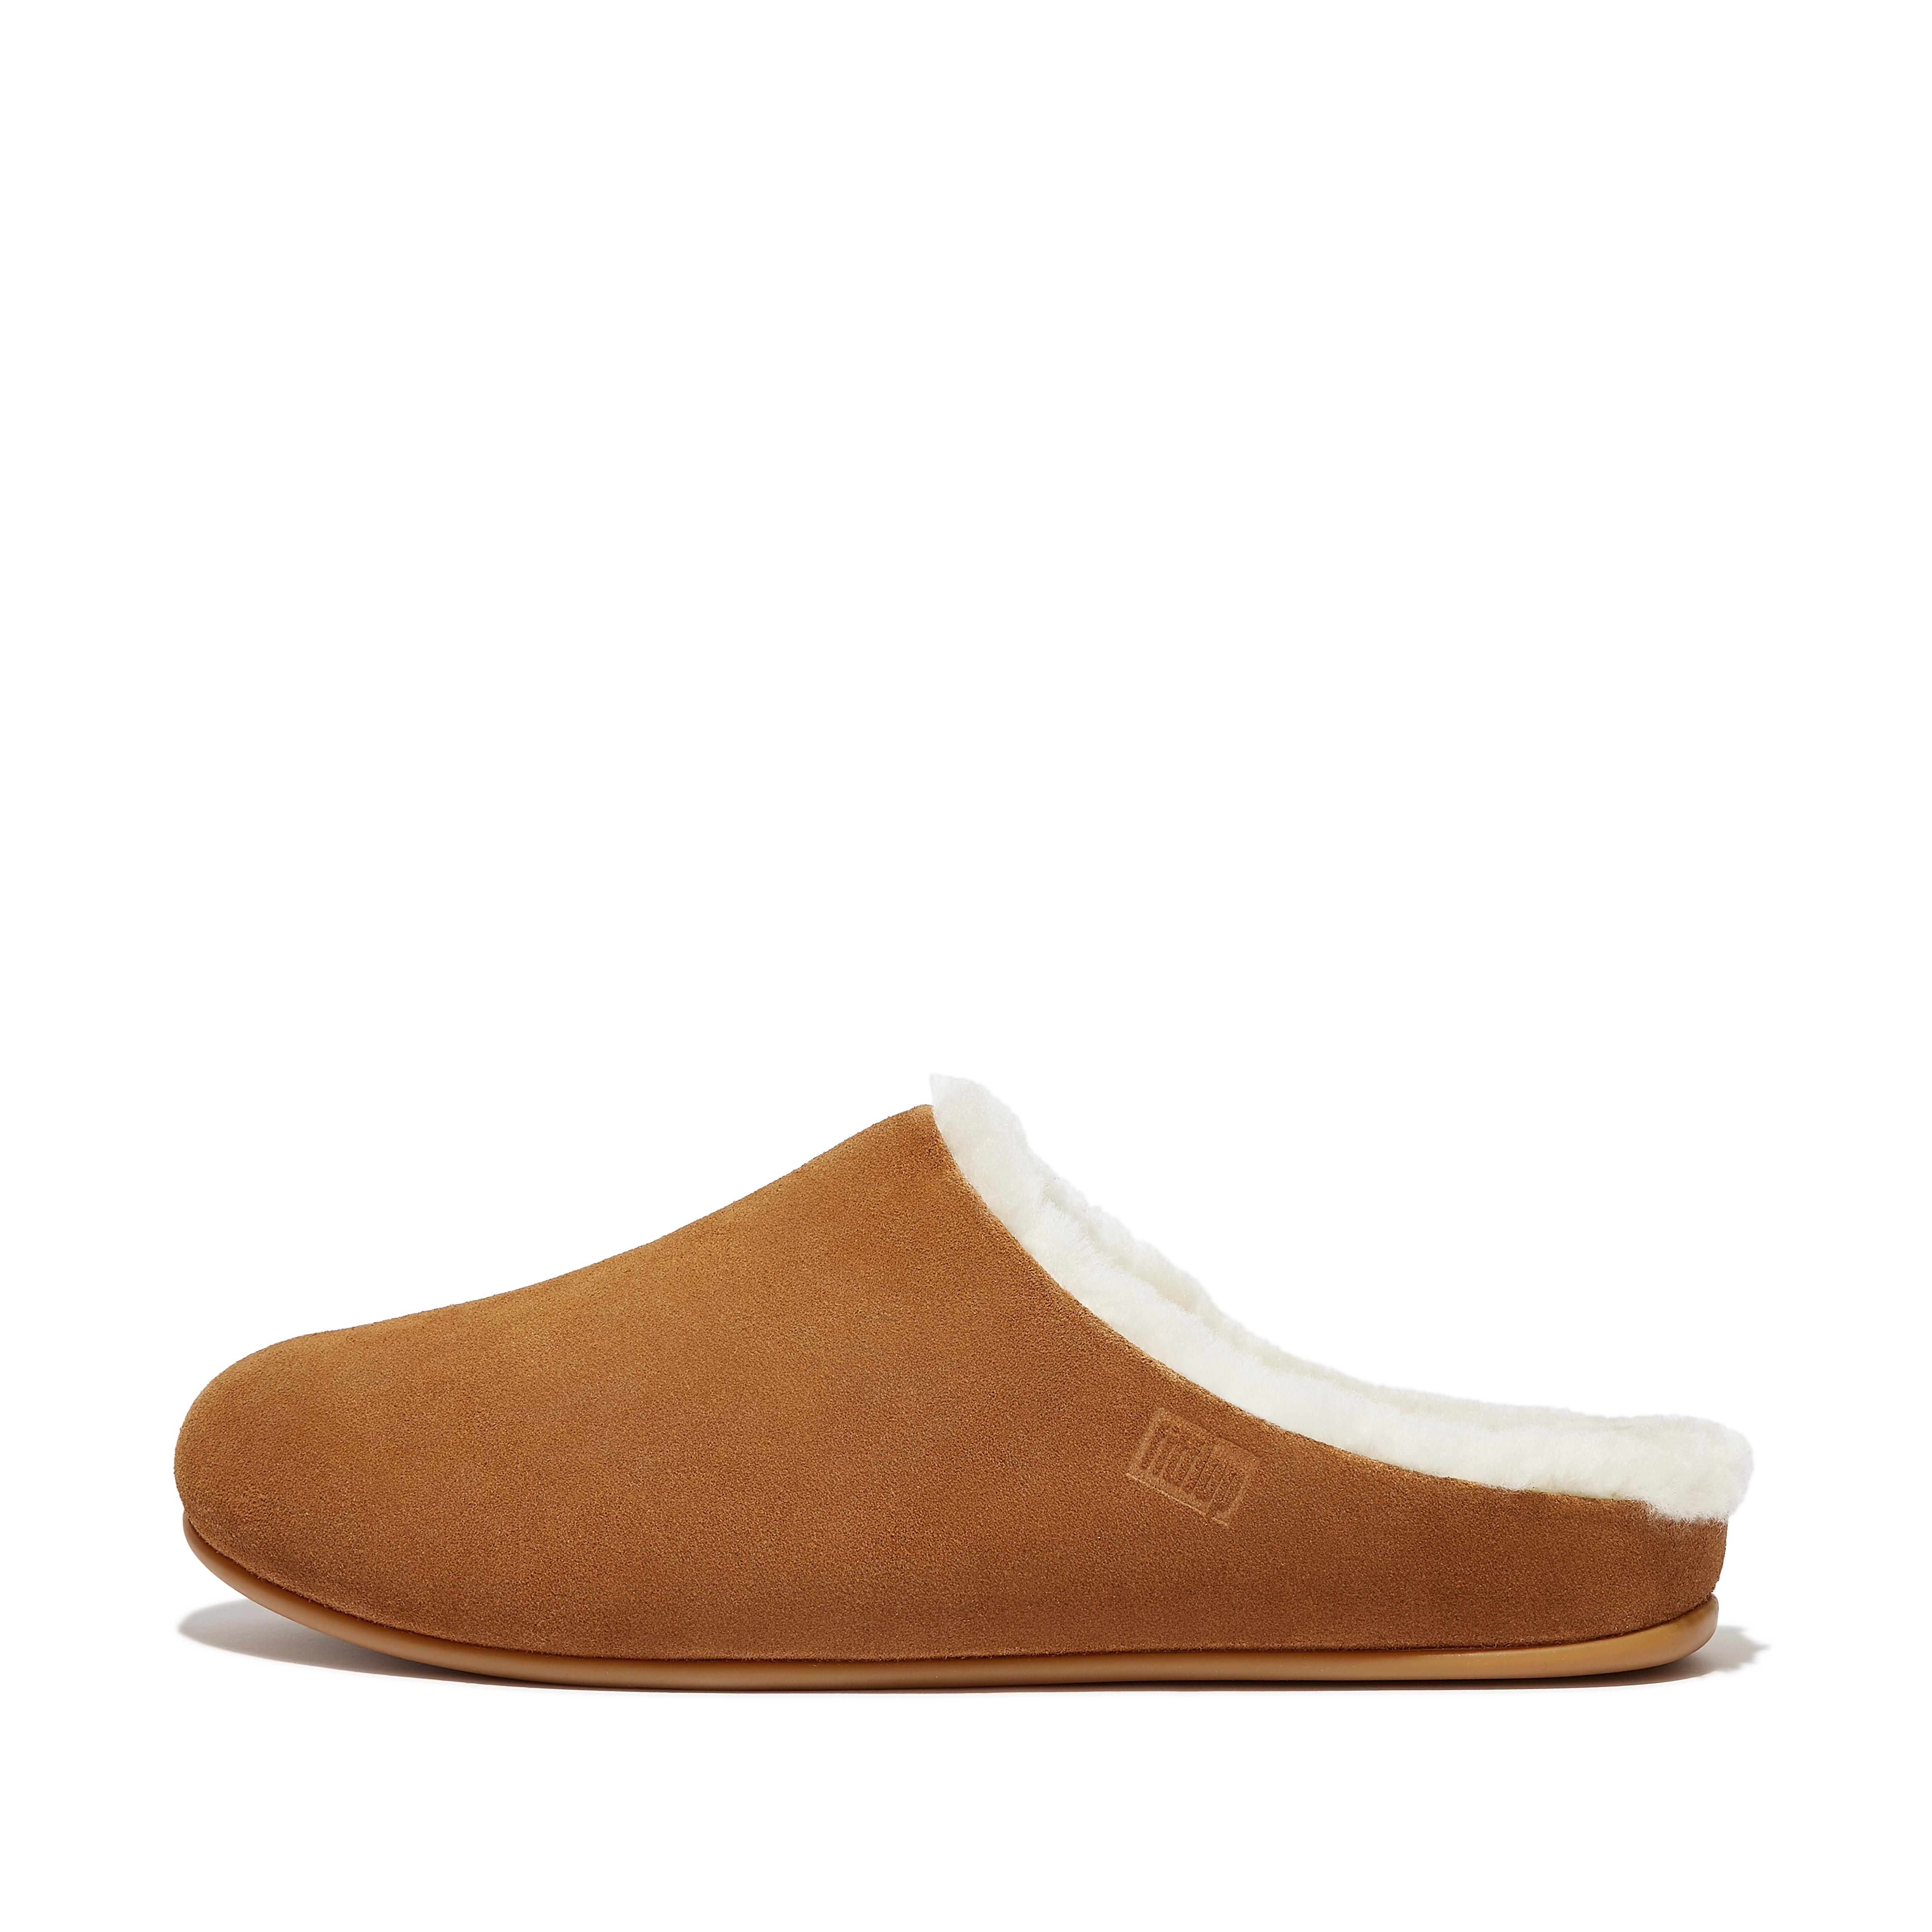 Fitflop Mens Shearling-Lined Suede Slippers